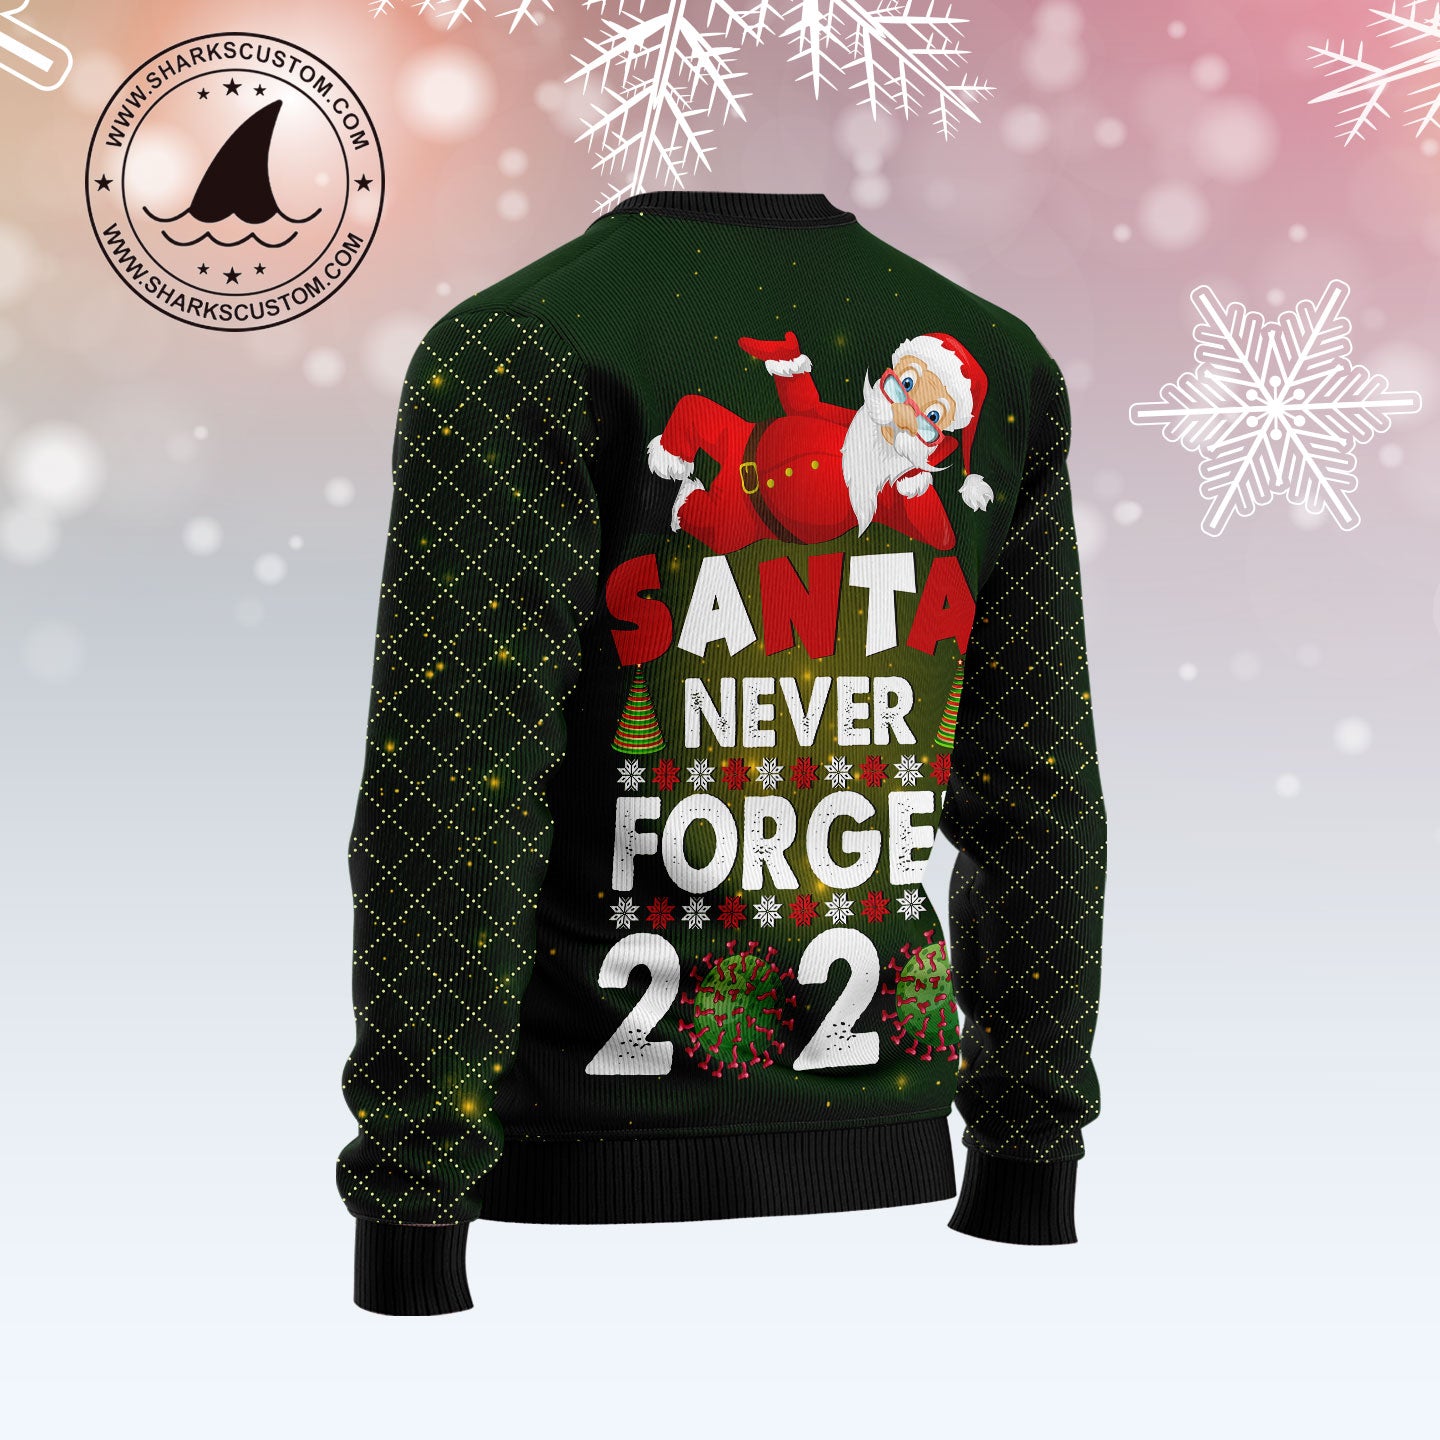 Santa Never Forget 2020 TY2110 Ugly Christmas Sweater